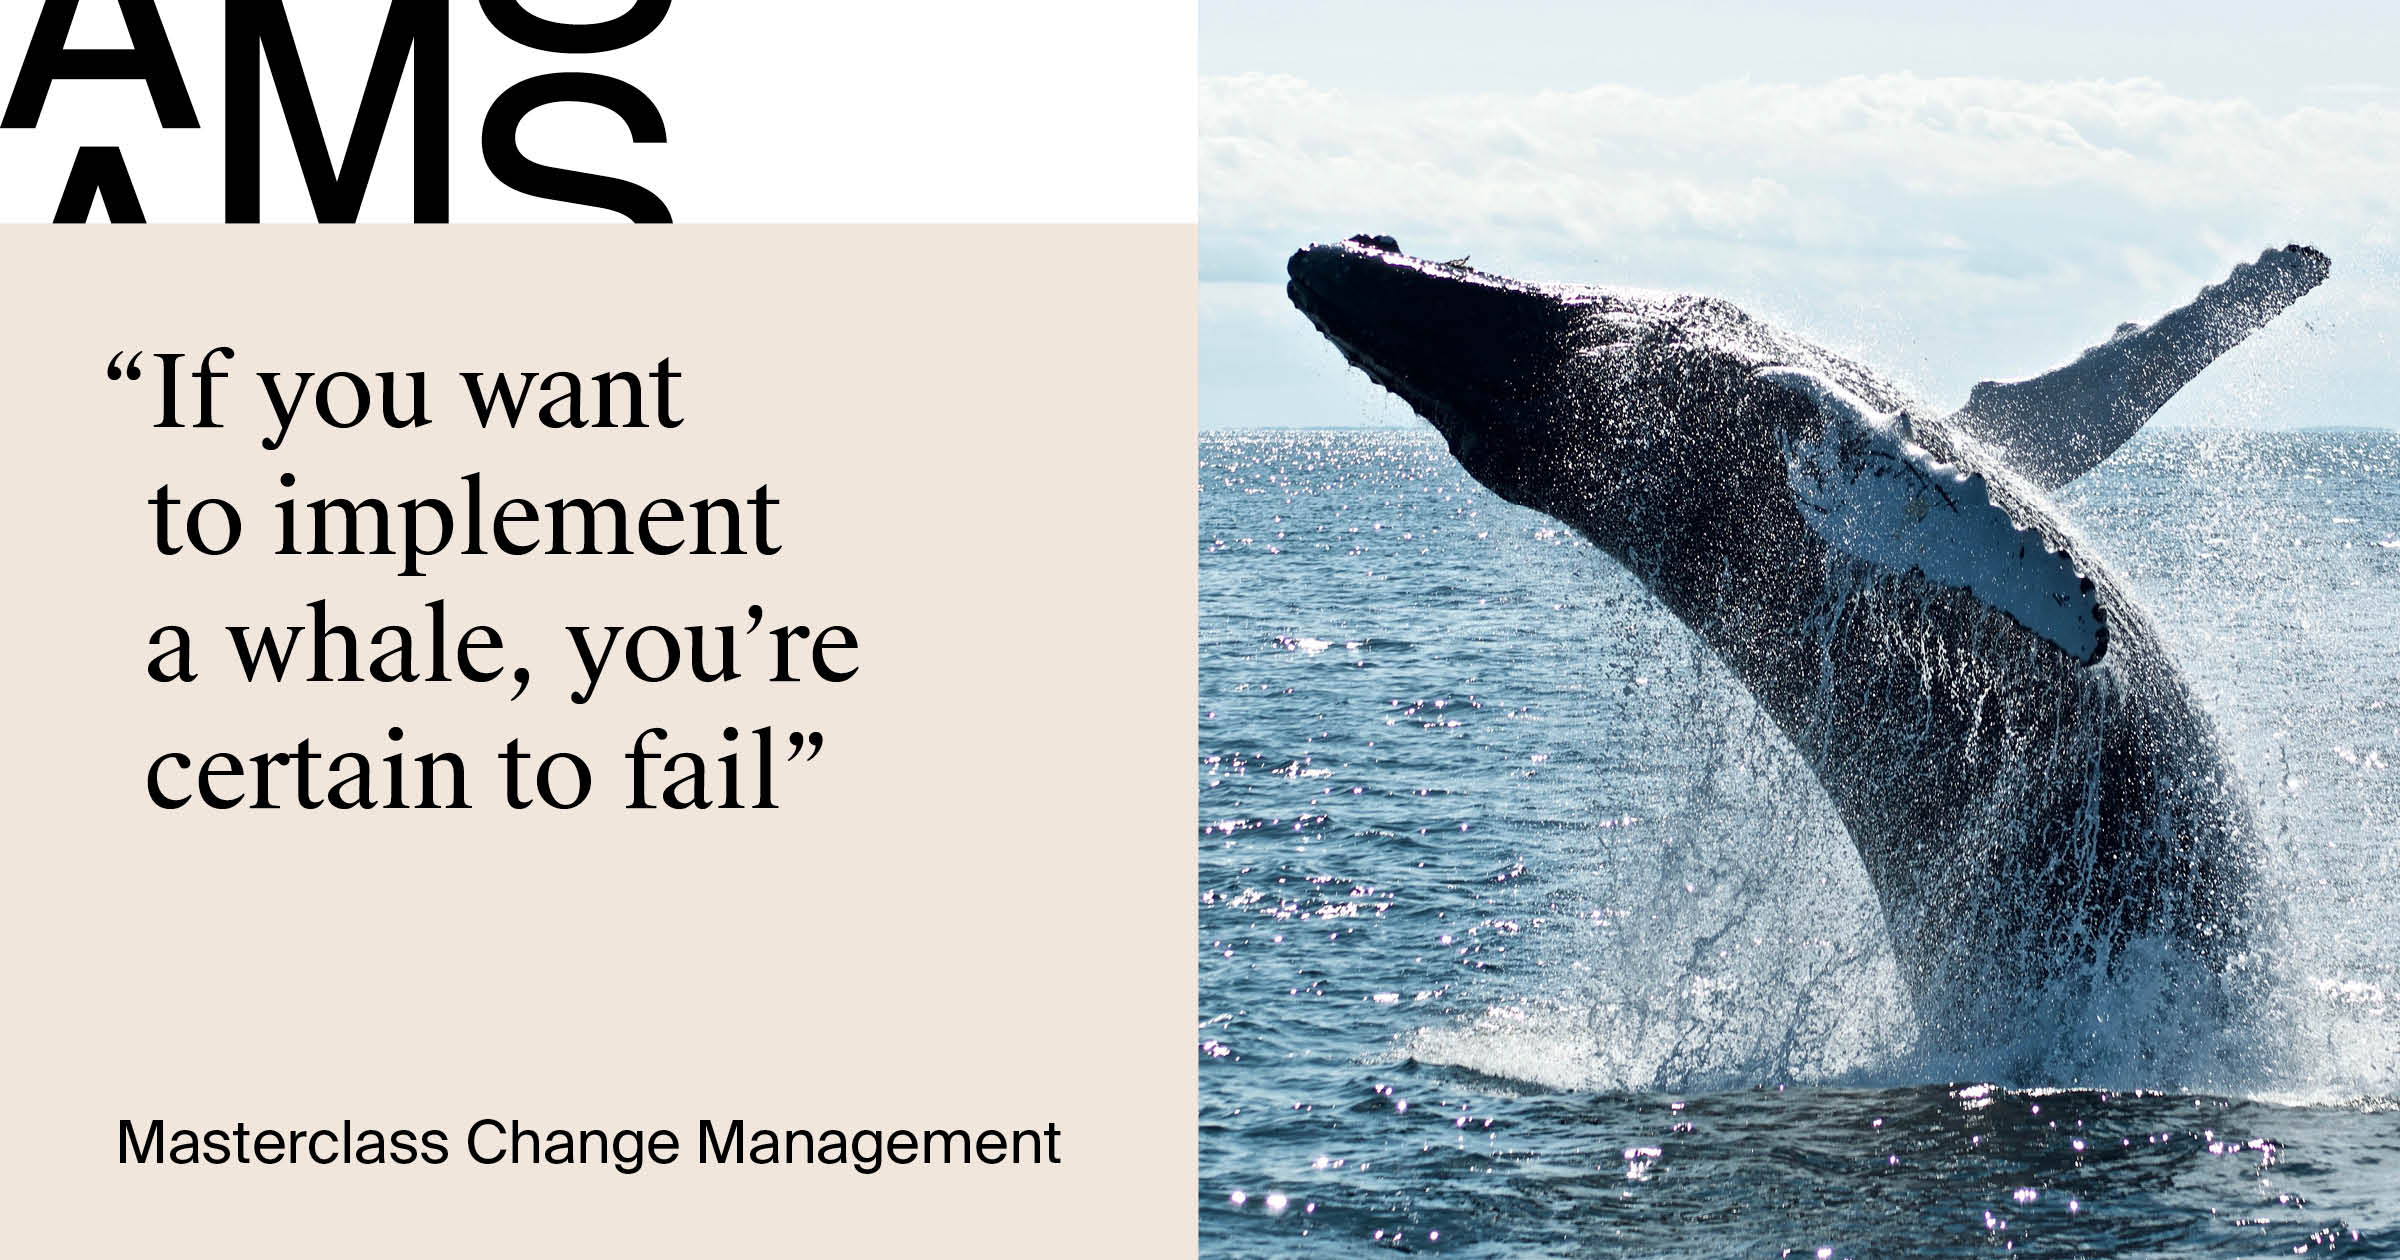 AMS_changeManagement_Banners_Social_WHALE